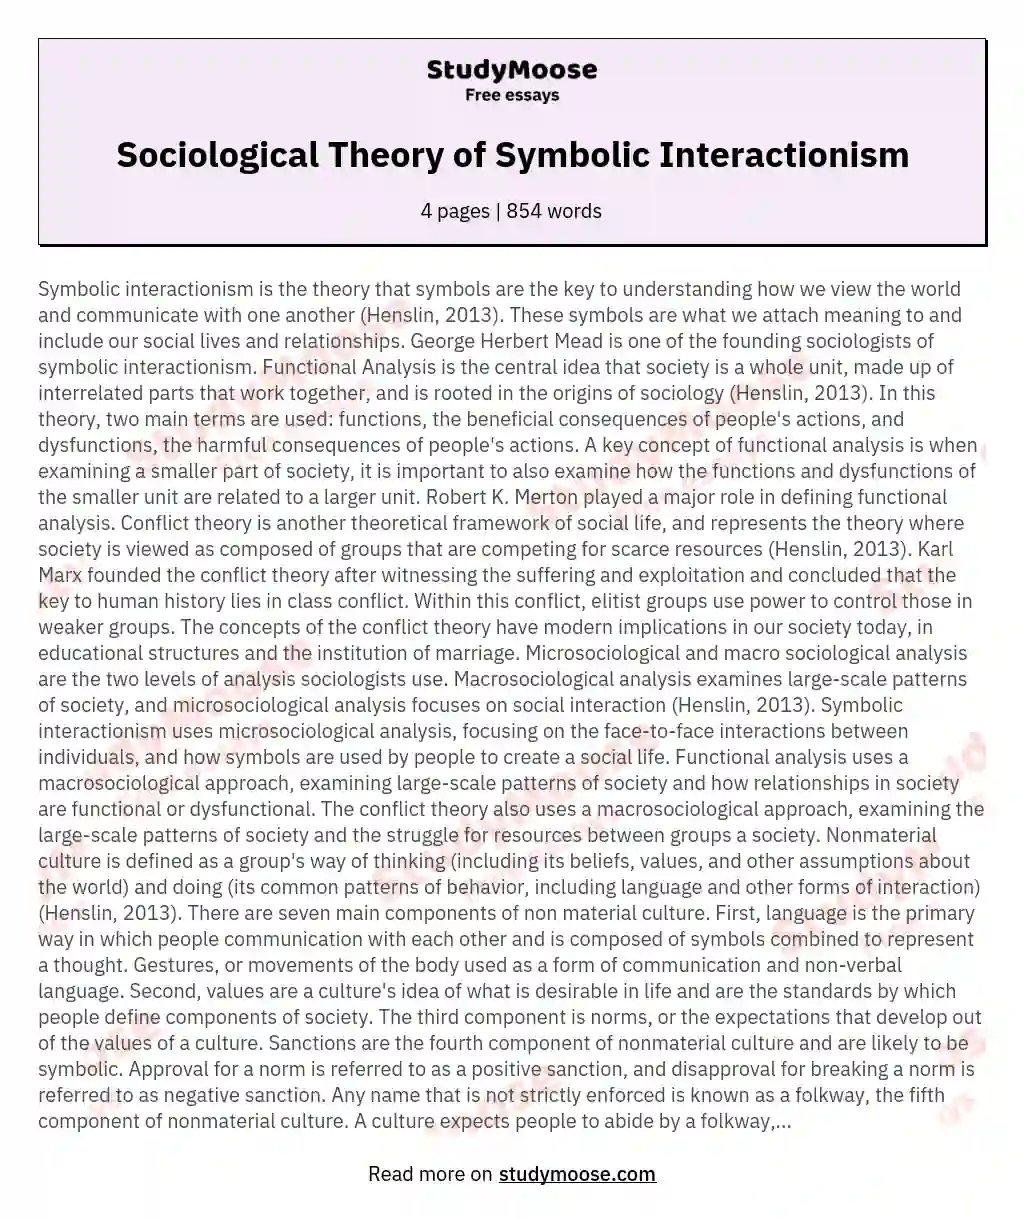 Sociological Theory of Symbolic Interactionism essay